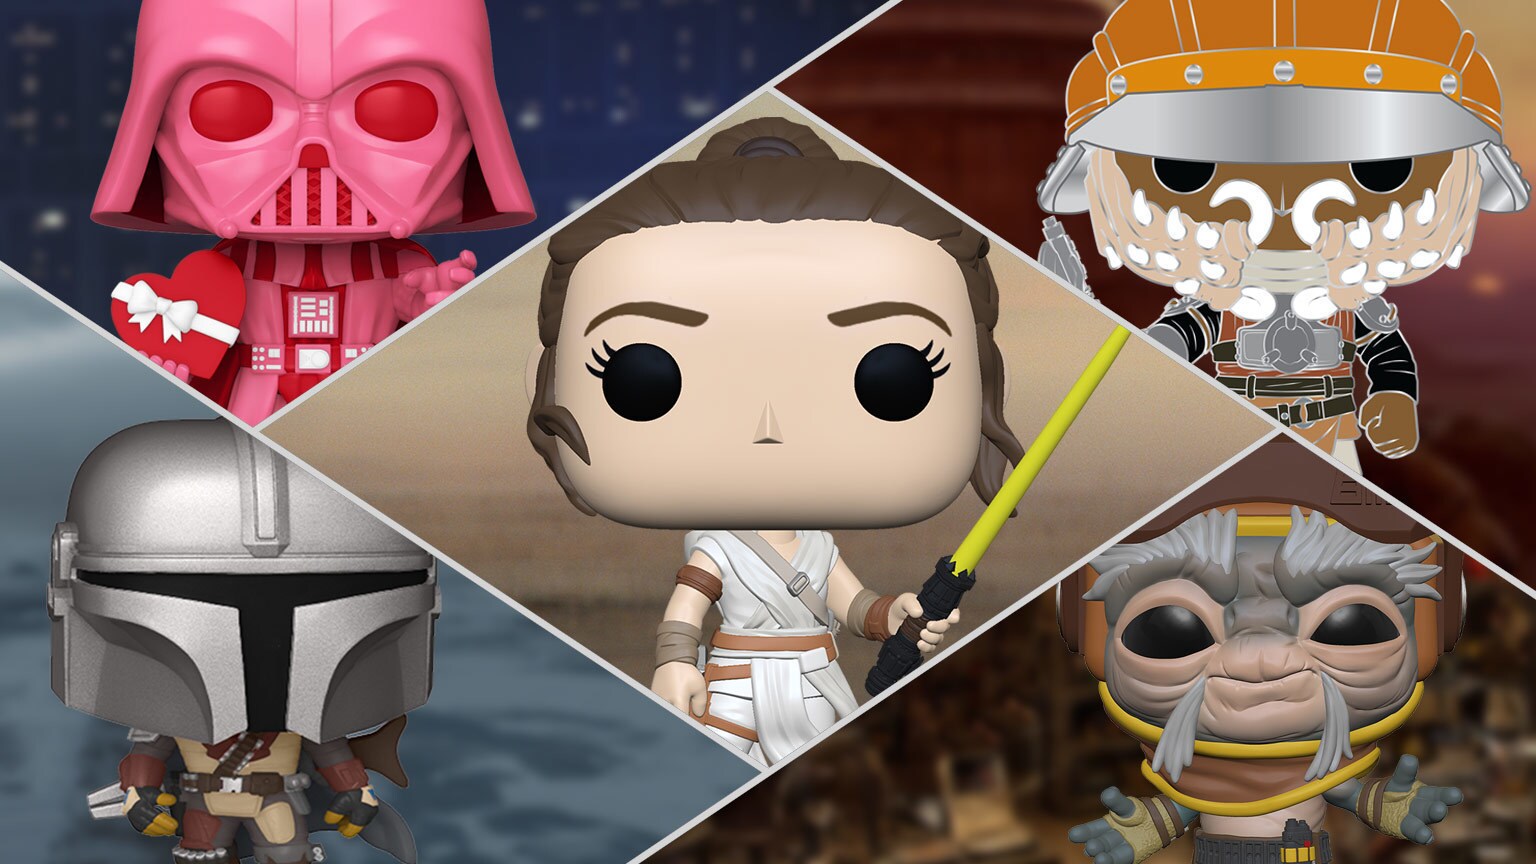 UPDATED: Get Your First Look at All the Star Wars Funko Fair Reveals